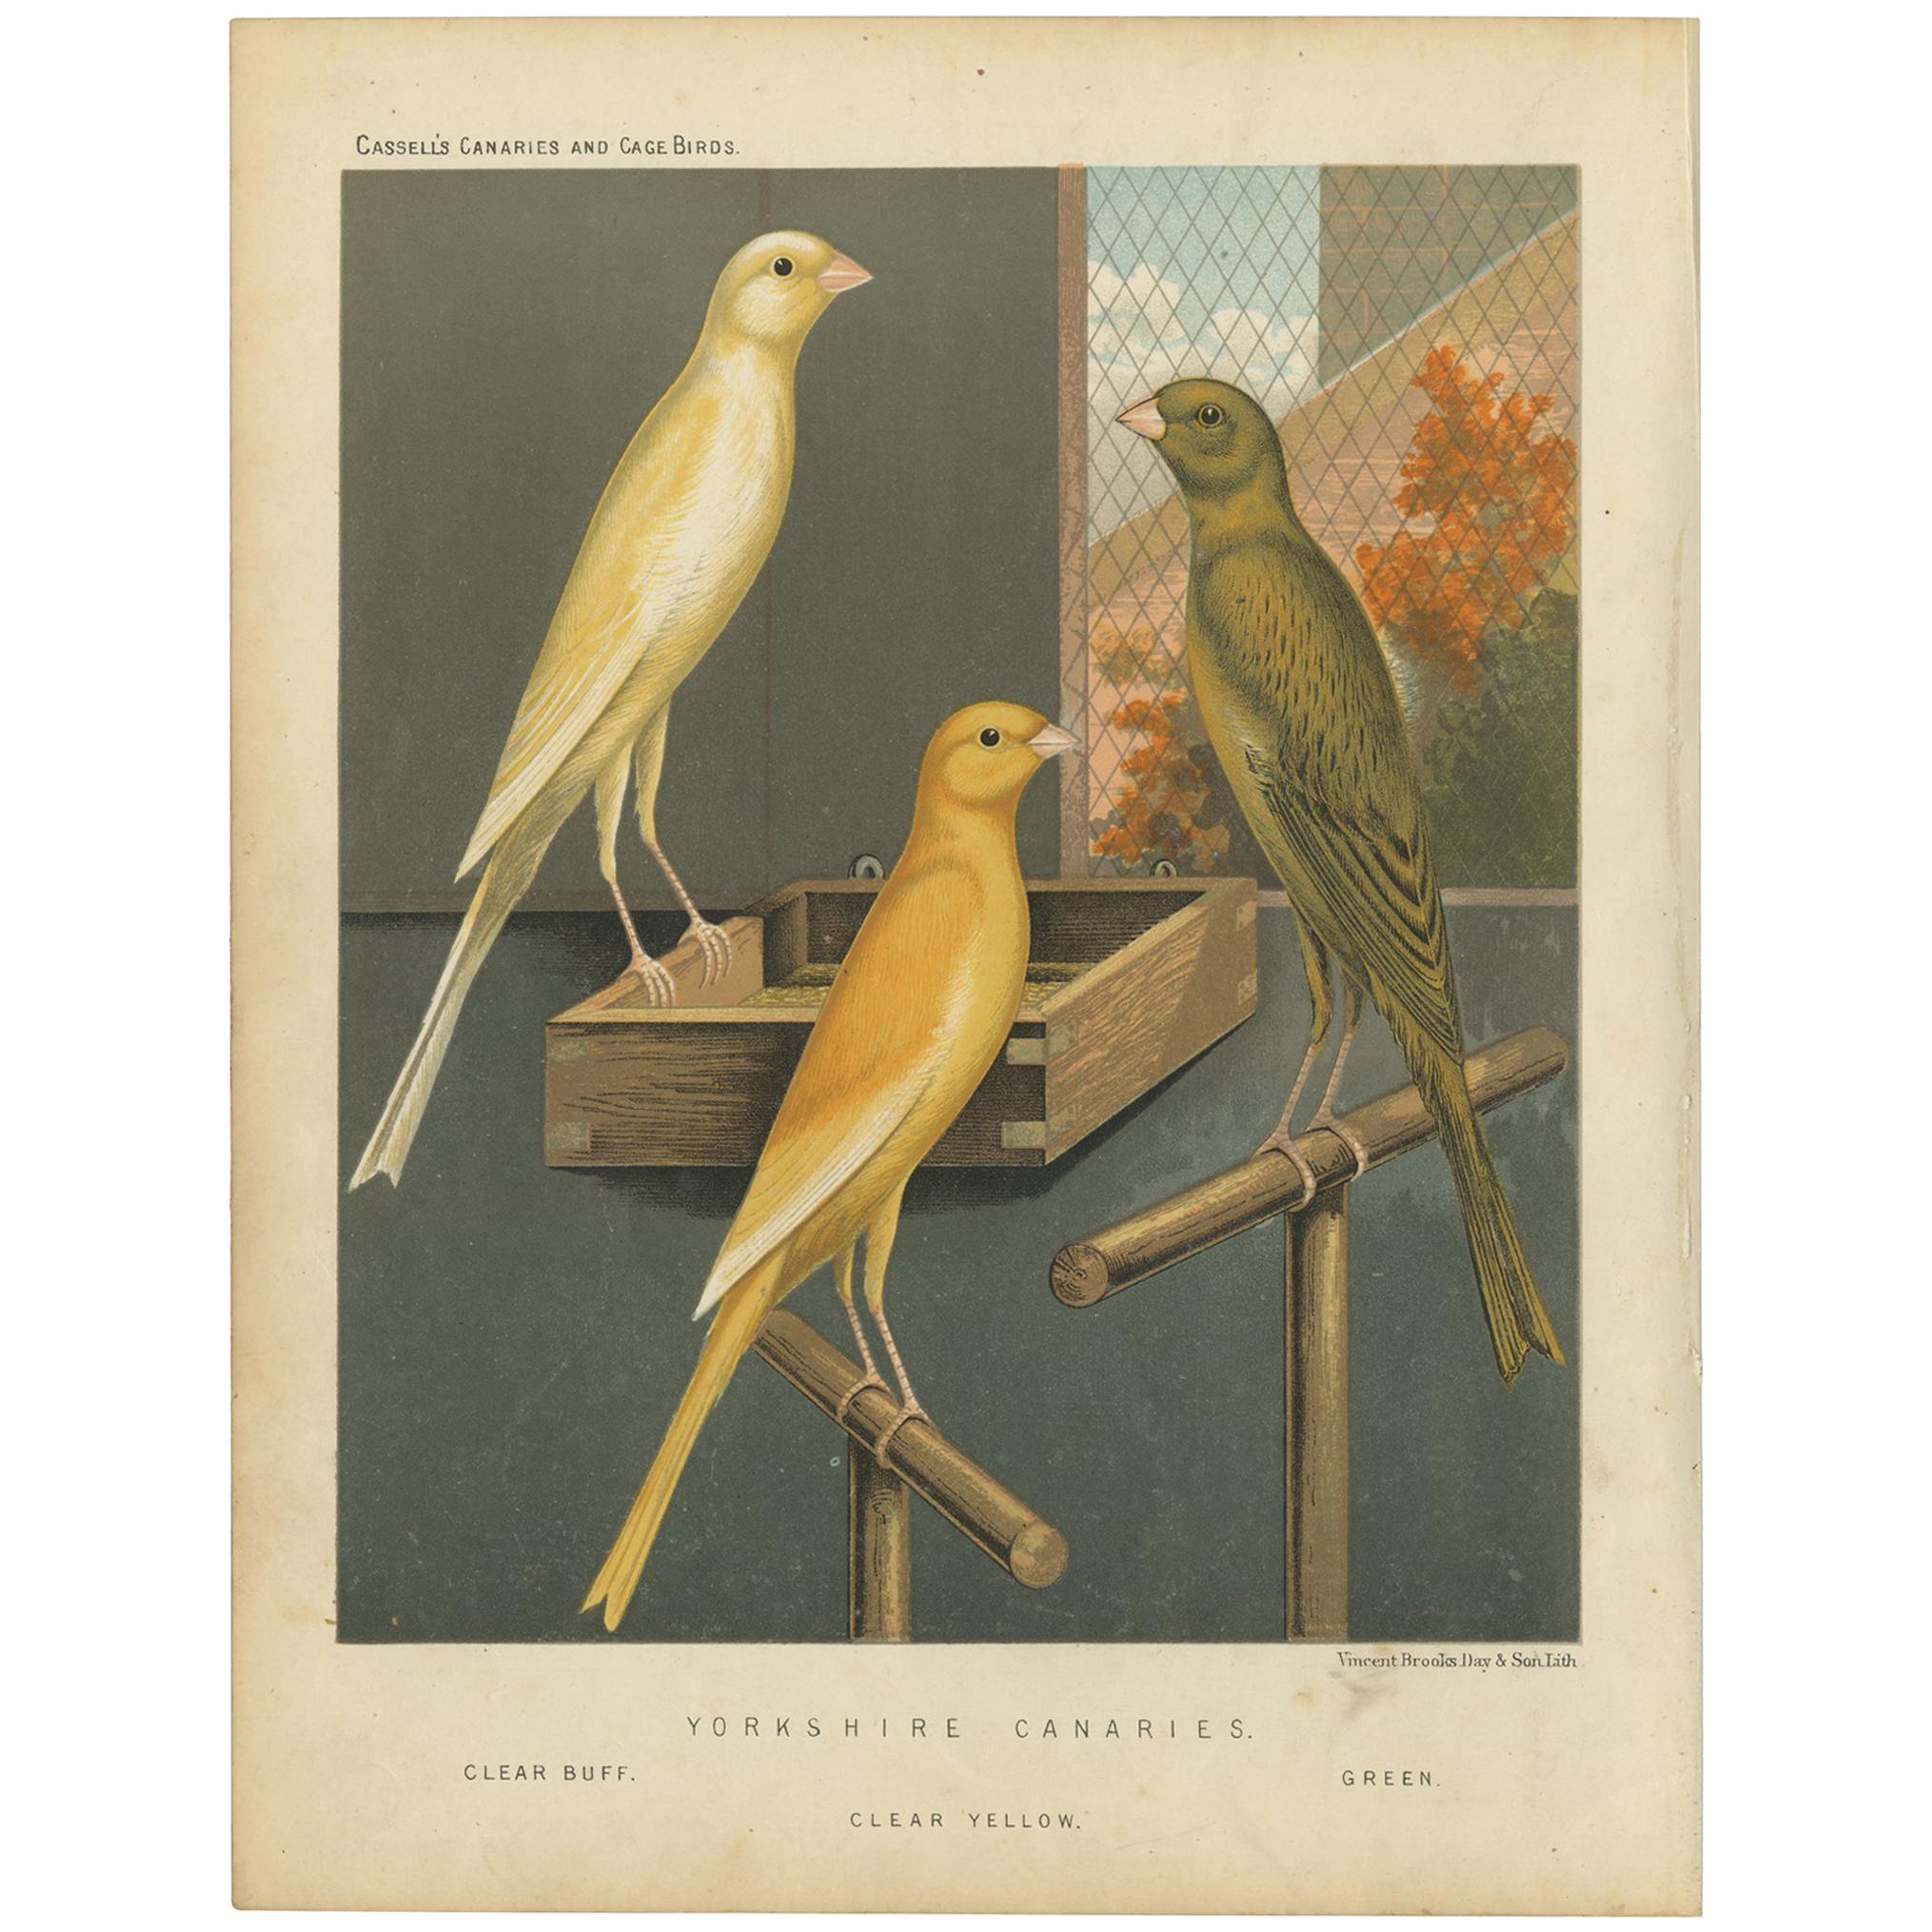 Antique Bird Print of the Yorkshire Canaries, Clear Buff, Clear Yellow and Other